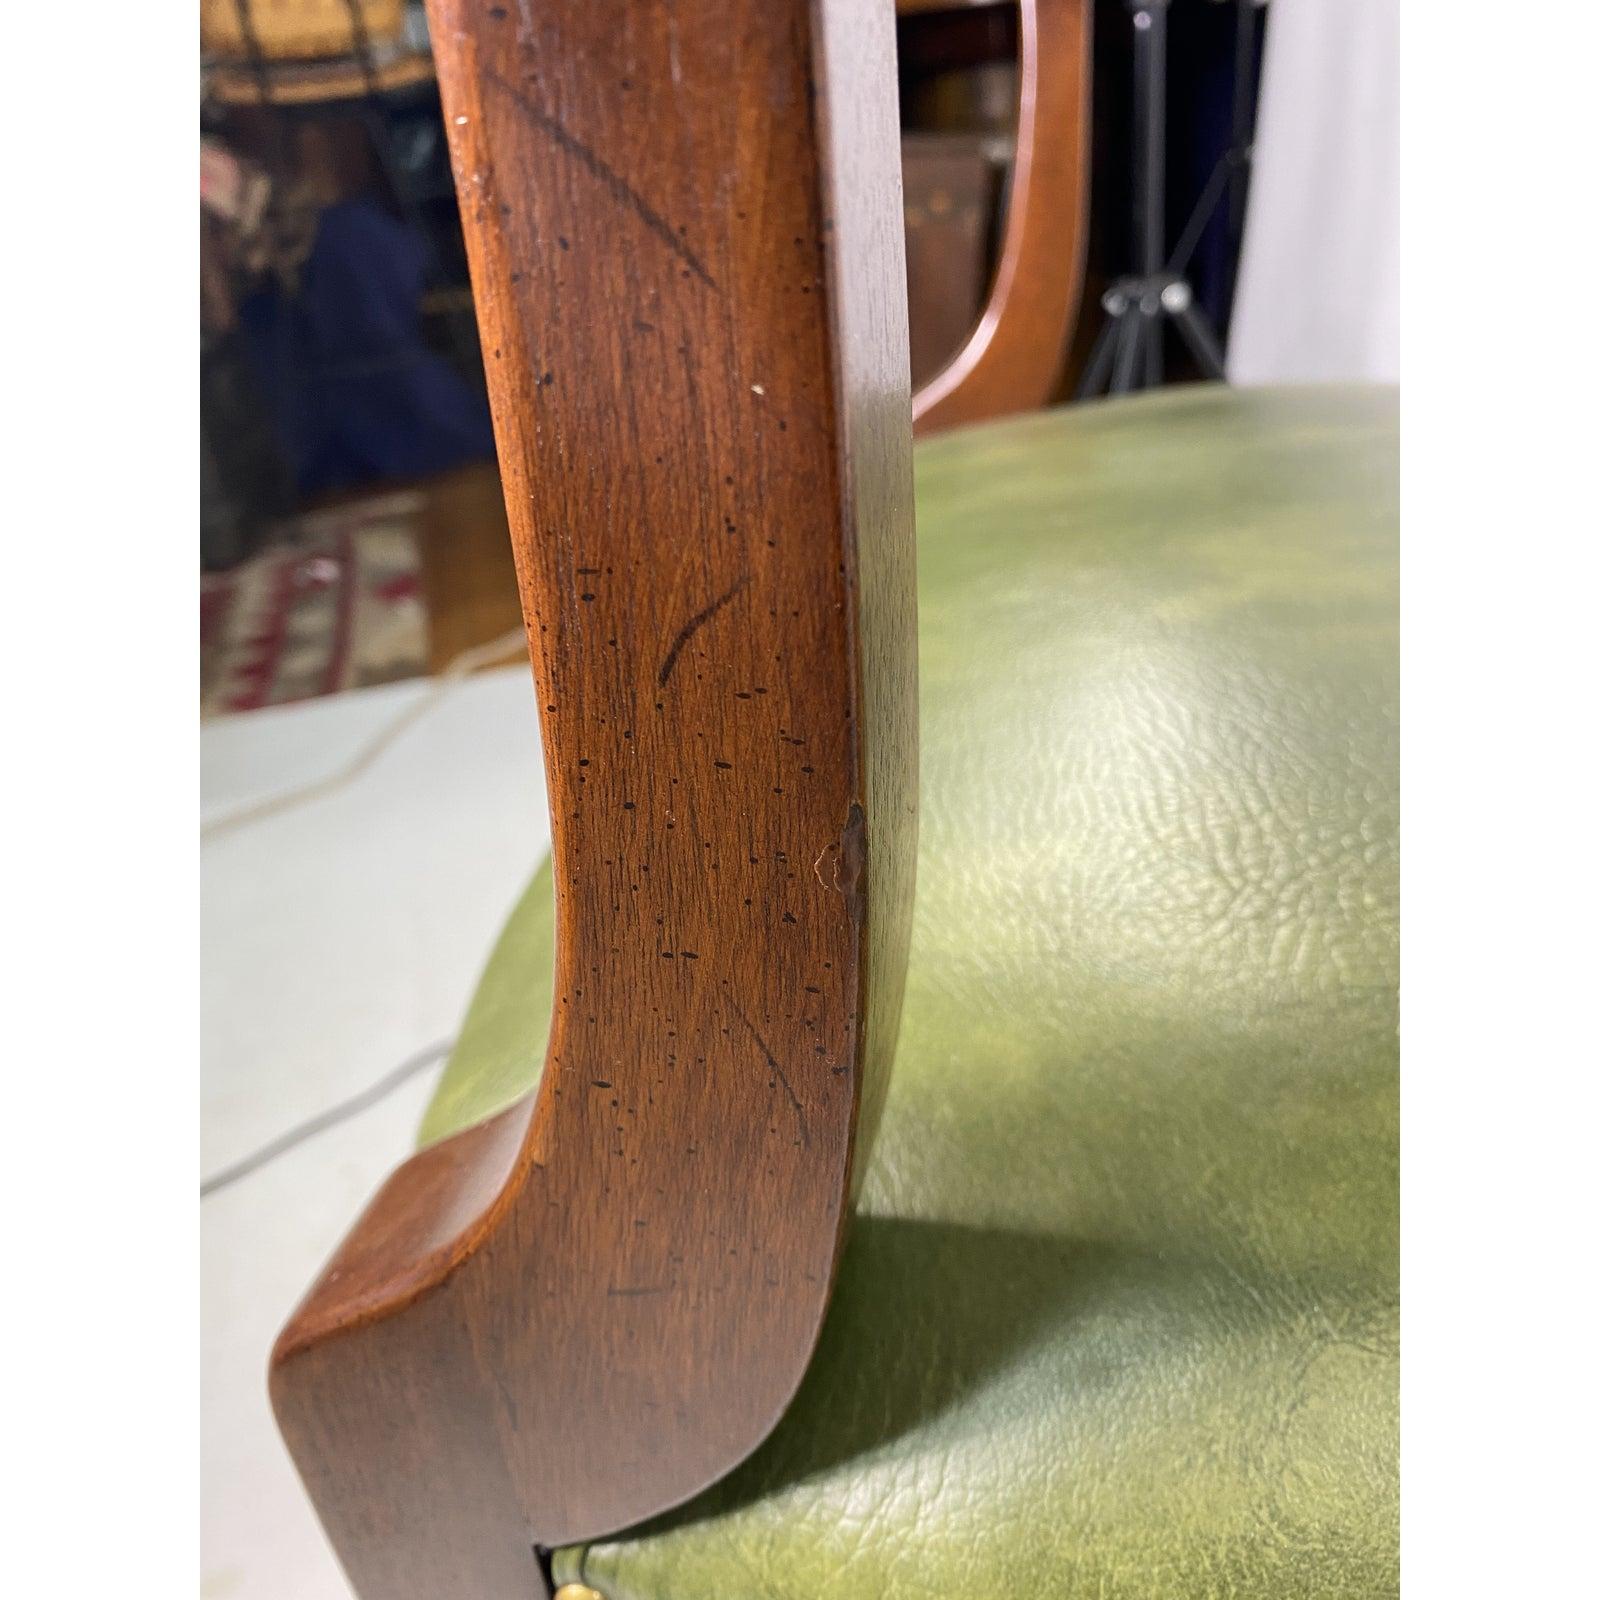 American Vintage Green Leather Chair Made by Hickory Chair Company